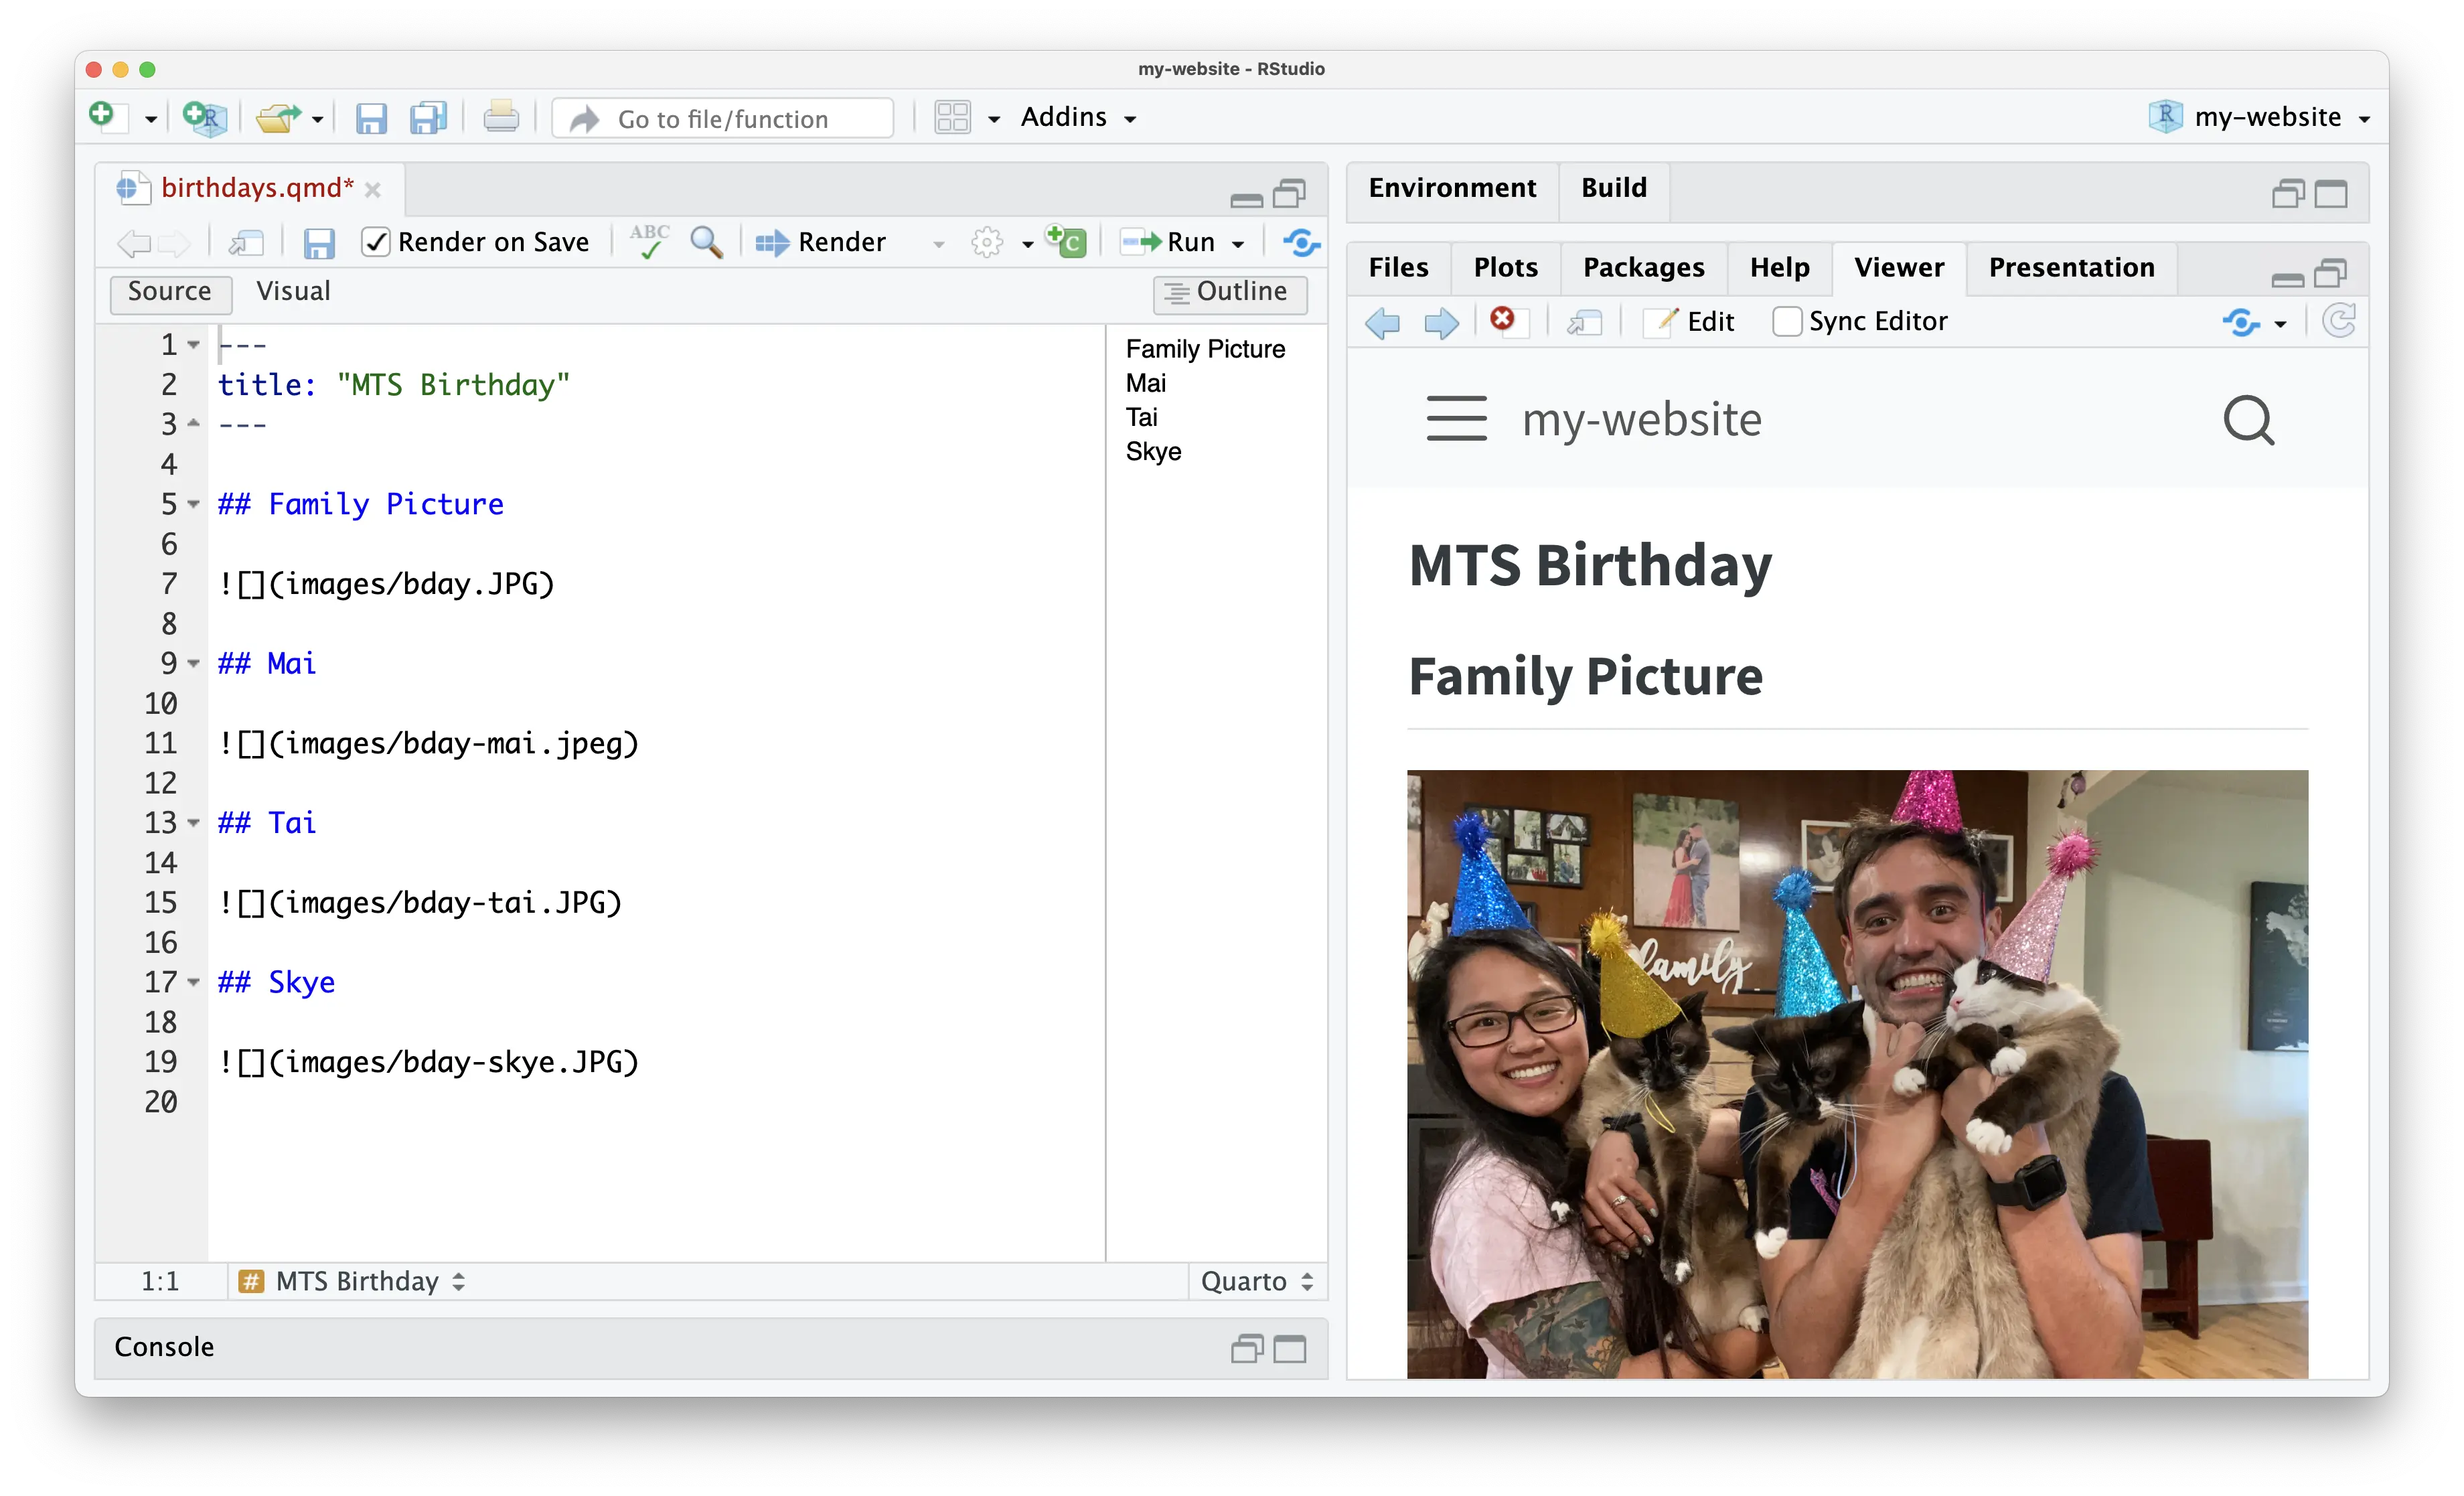 RStudio with the 'birthdays.qmd' file in editor mode side by side with the website preview of the MTS Birthday page.